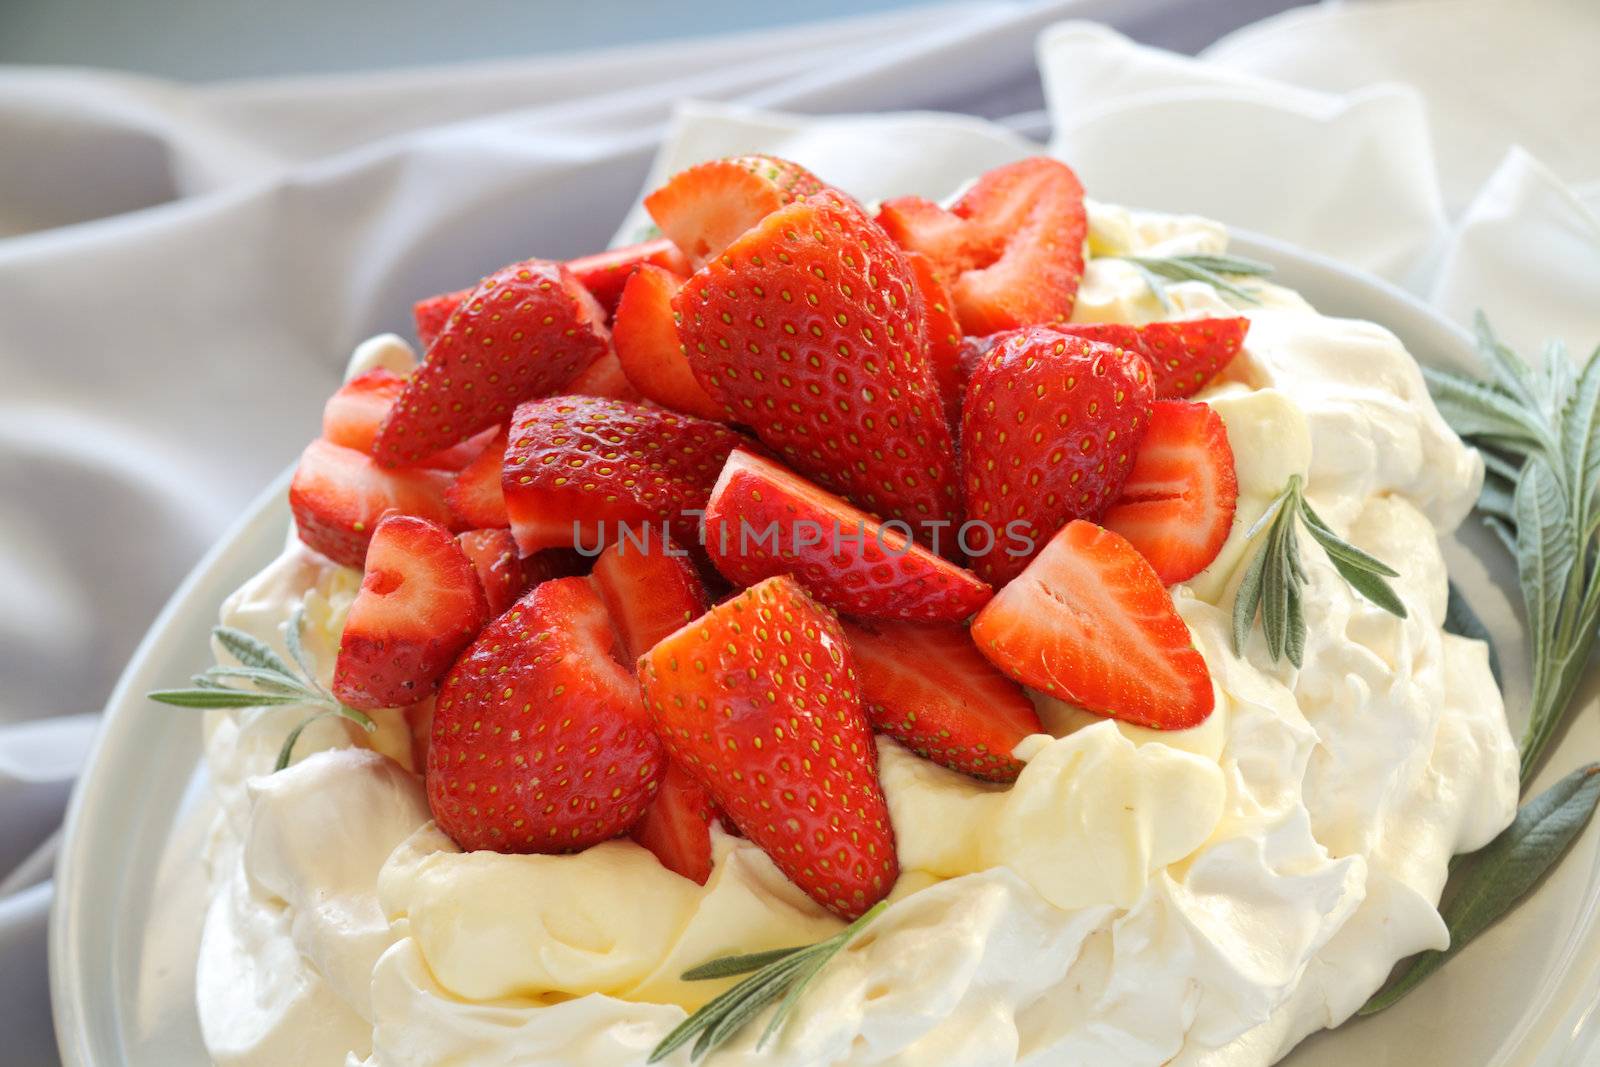 Delicious traditional Australian strawberry pavlova made from meringue and cream.